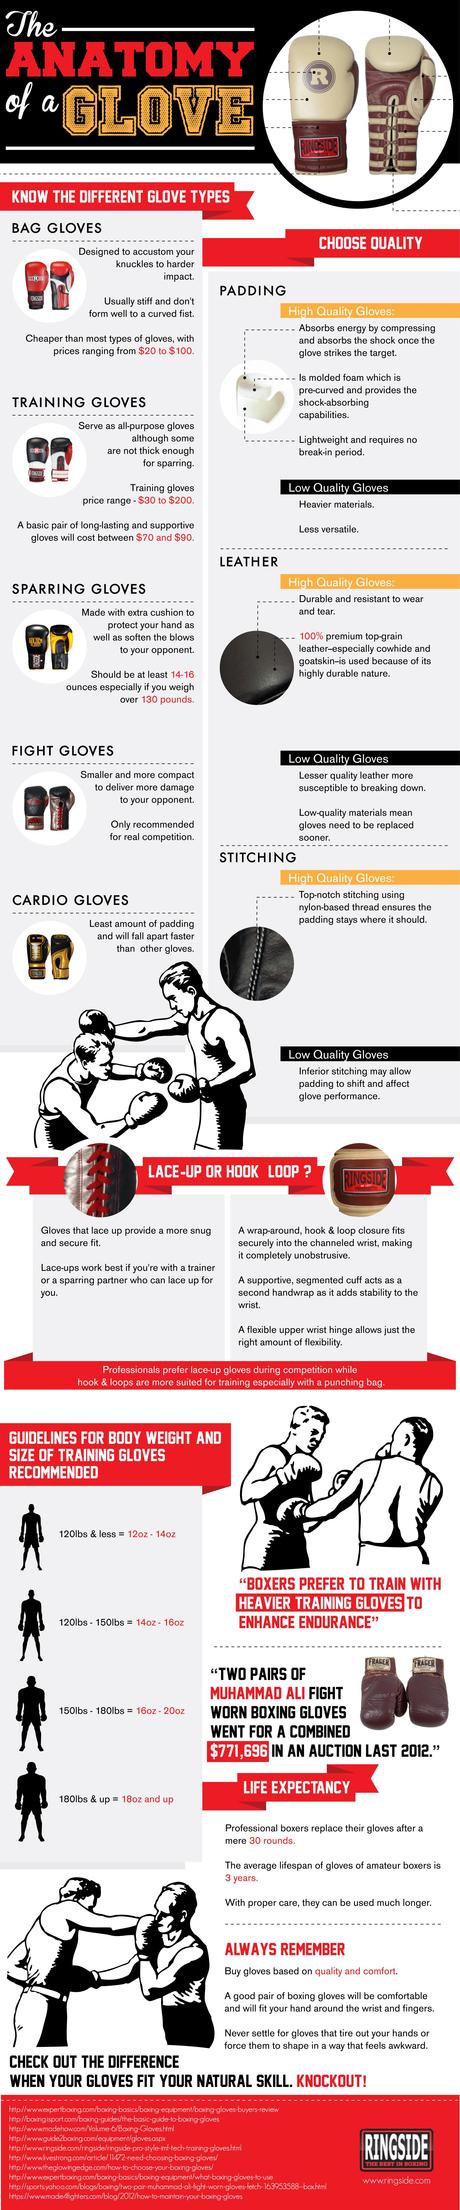 Ringside Boxing Glove Infographic